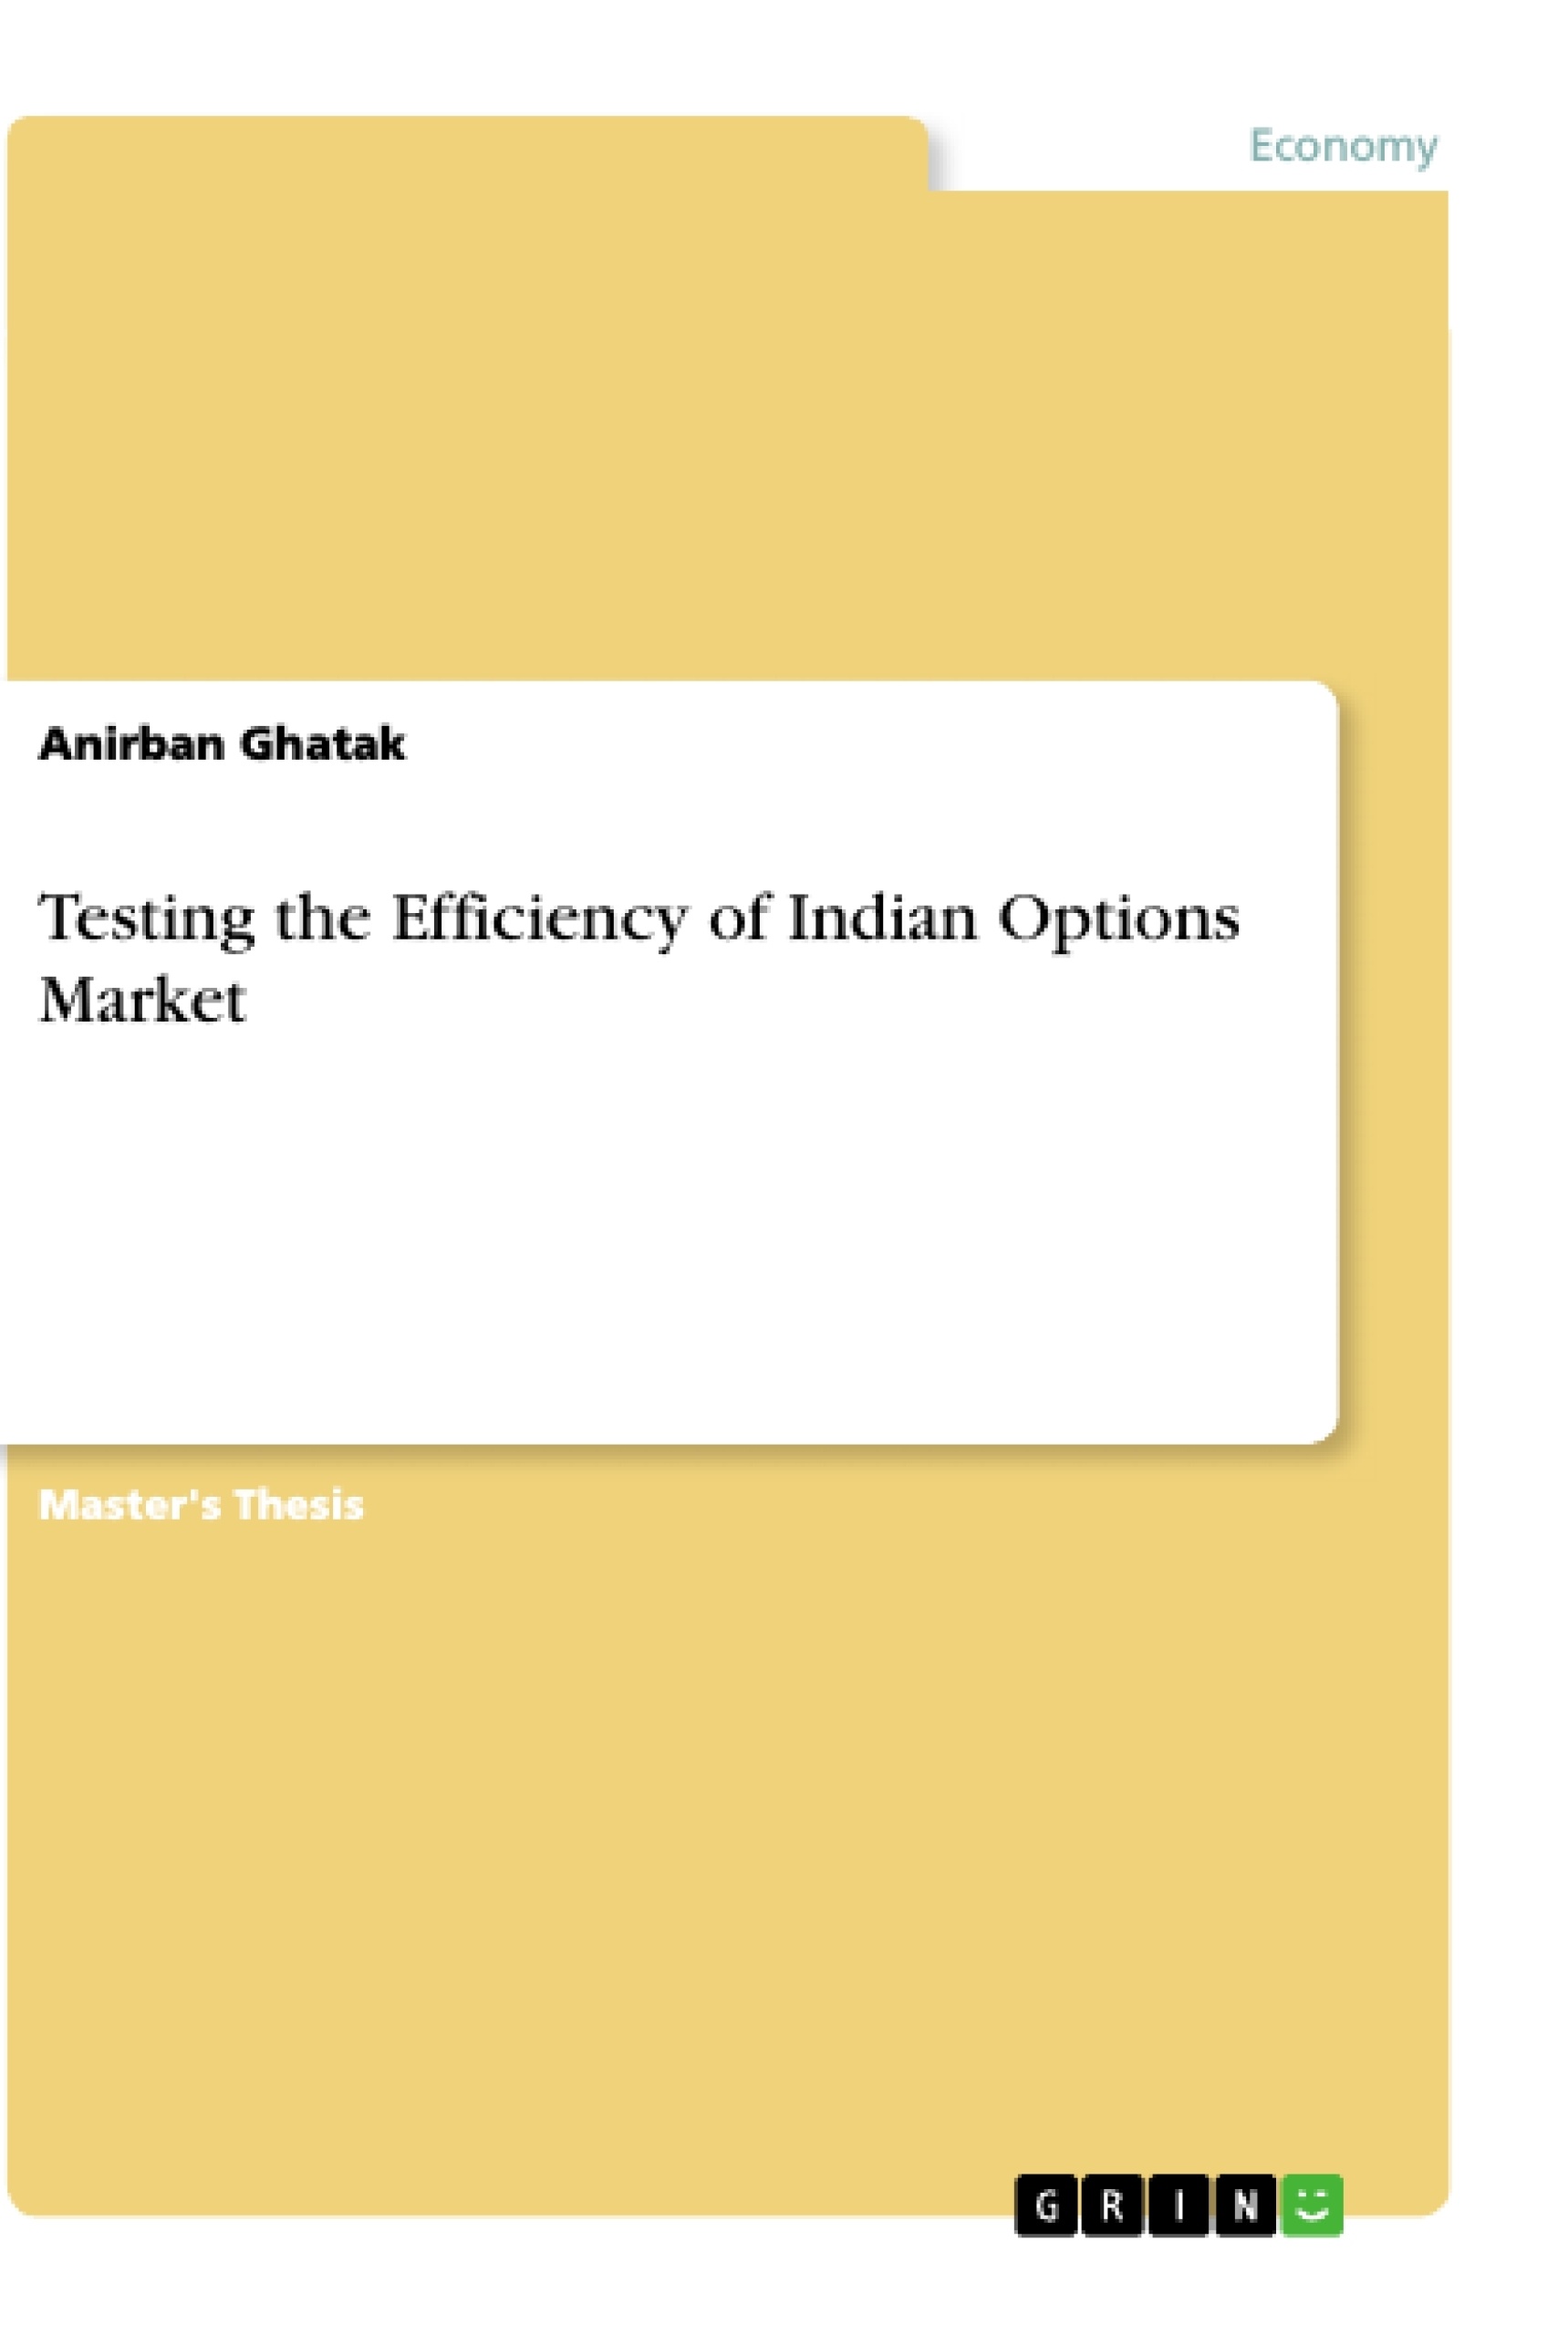 Titel: Testing the Efficiency of Indian Options Market